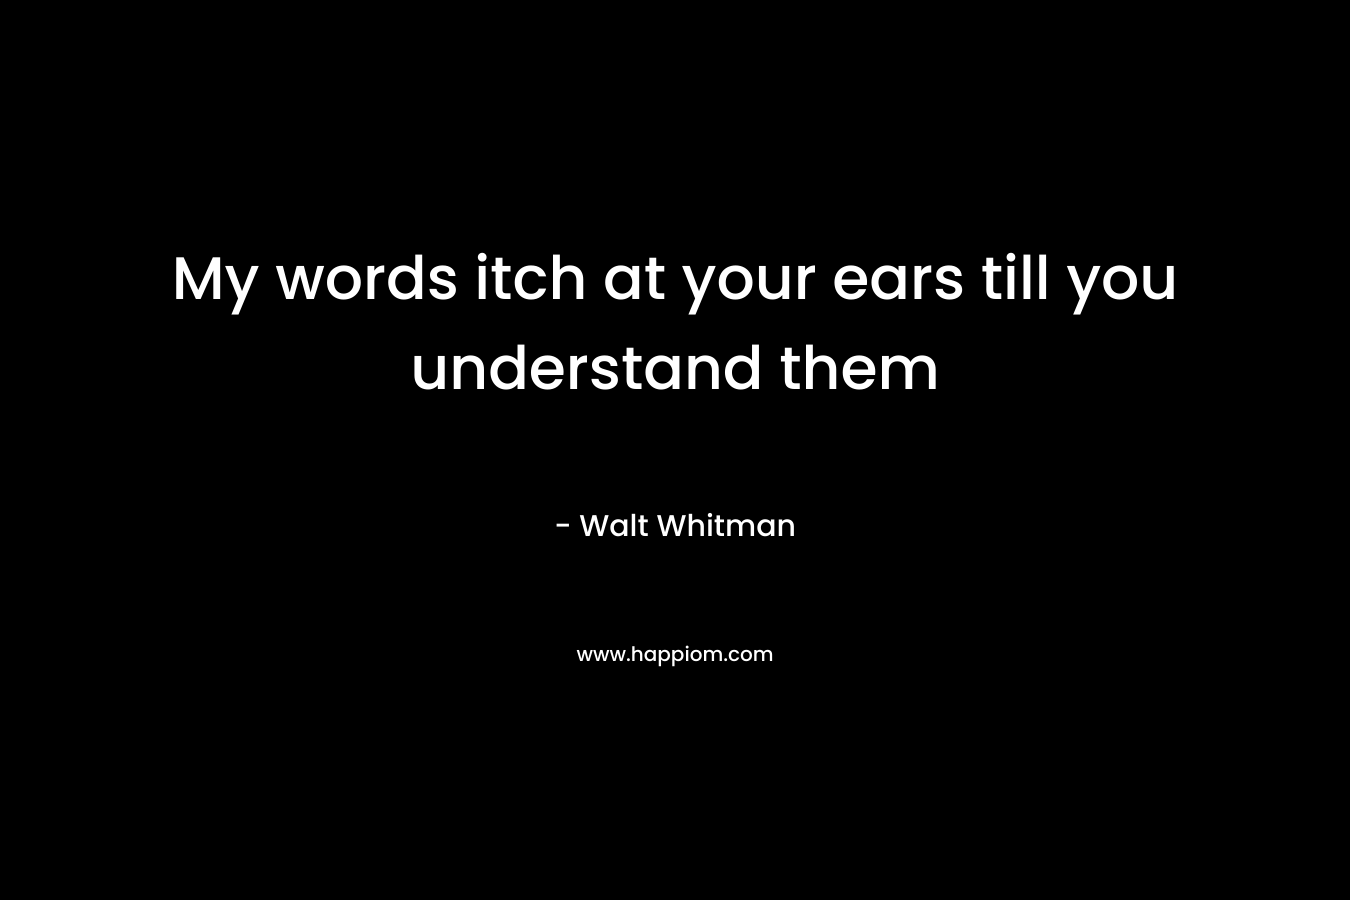 My words itch at your ears till you understand them – Walt Whitman